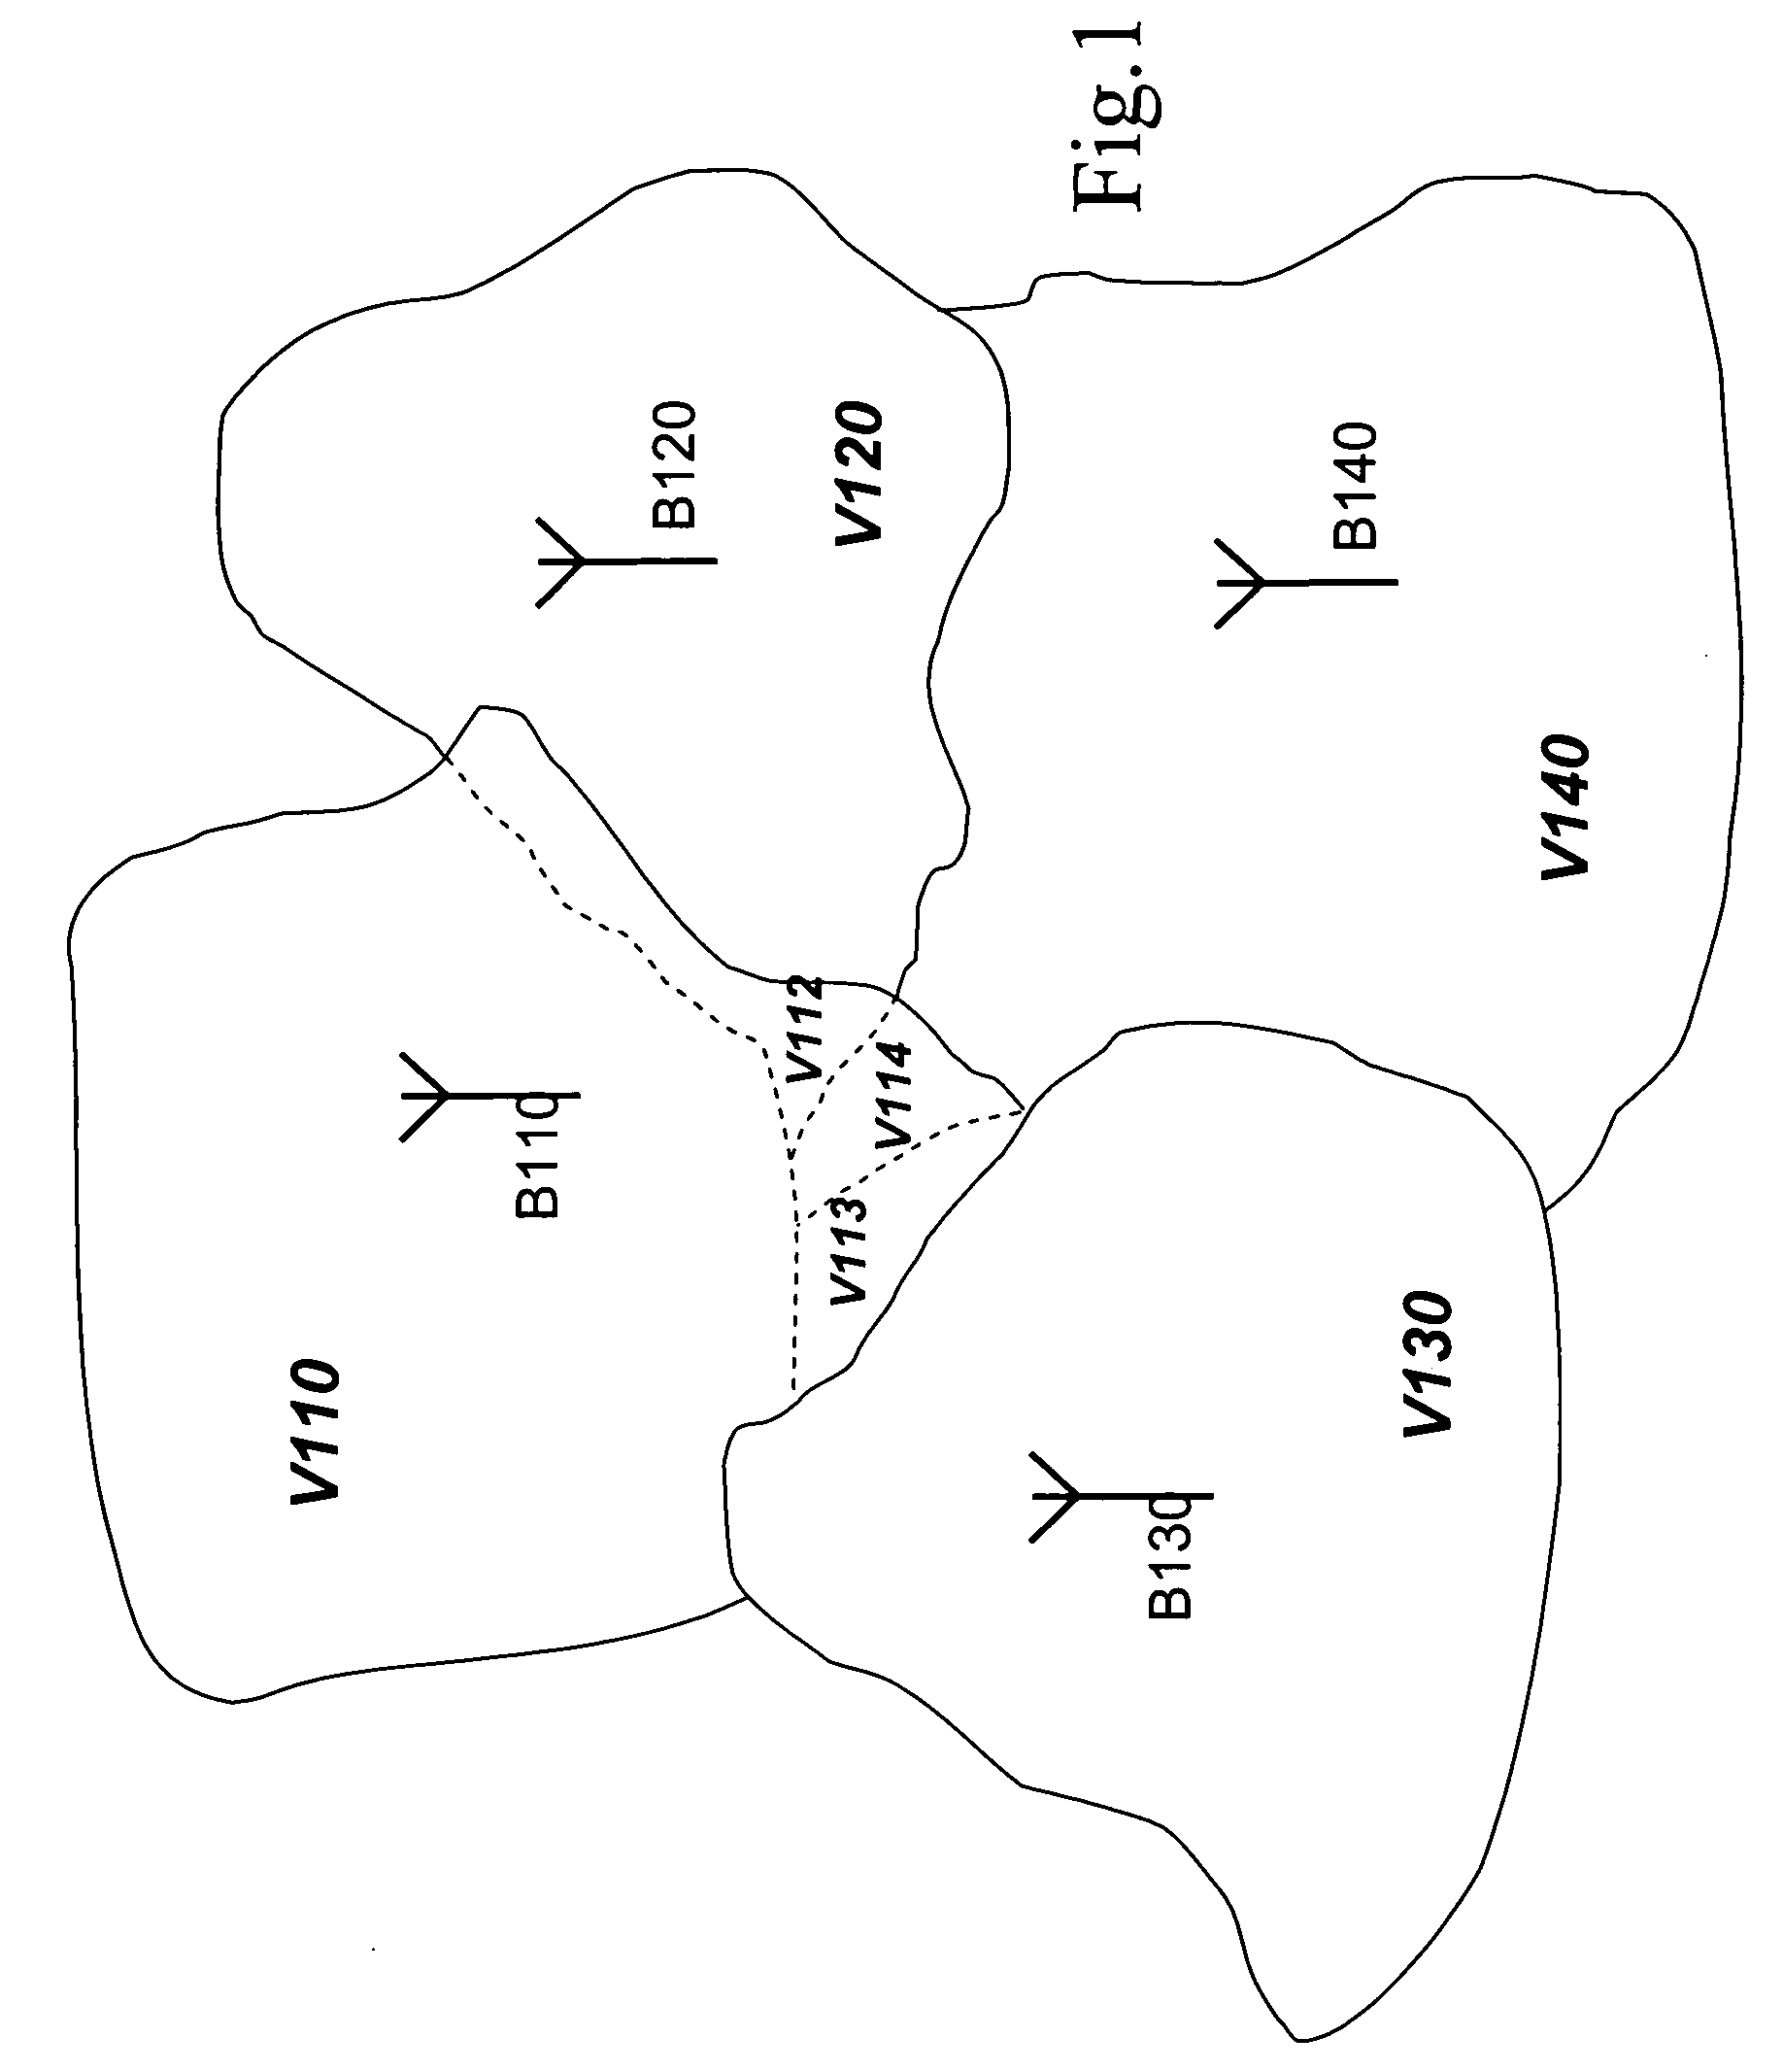 Method and device for optimising cellular wireless communication networks